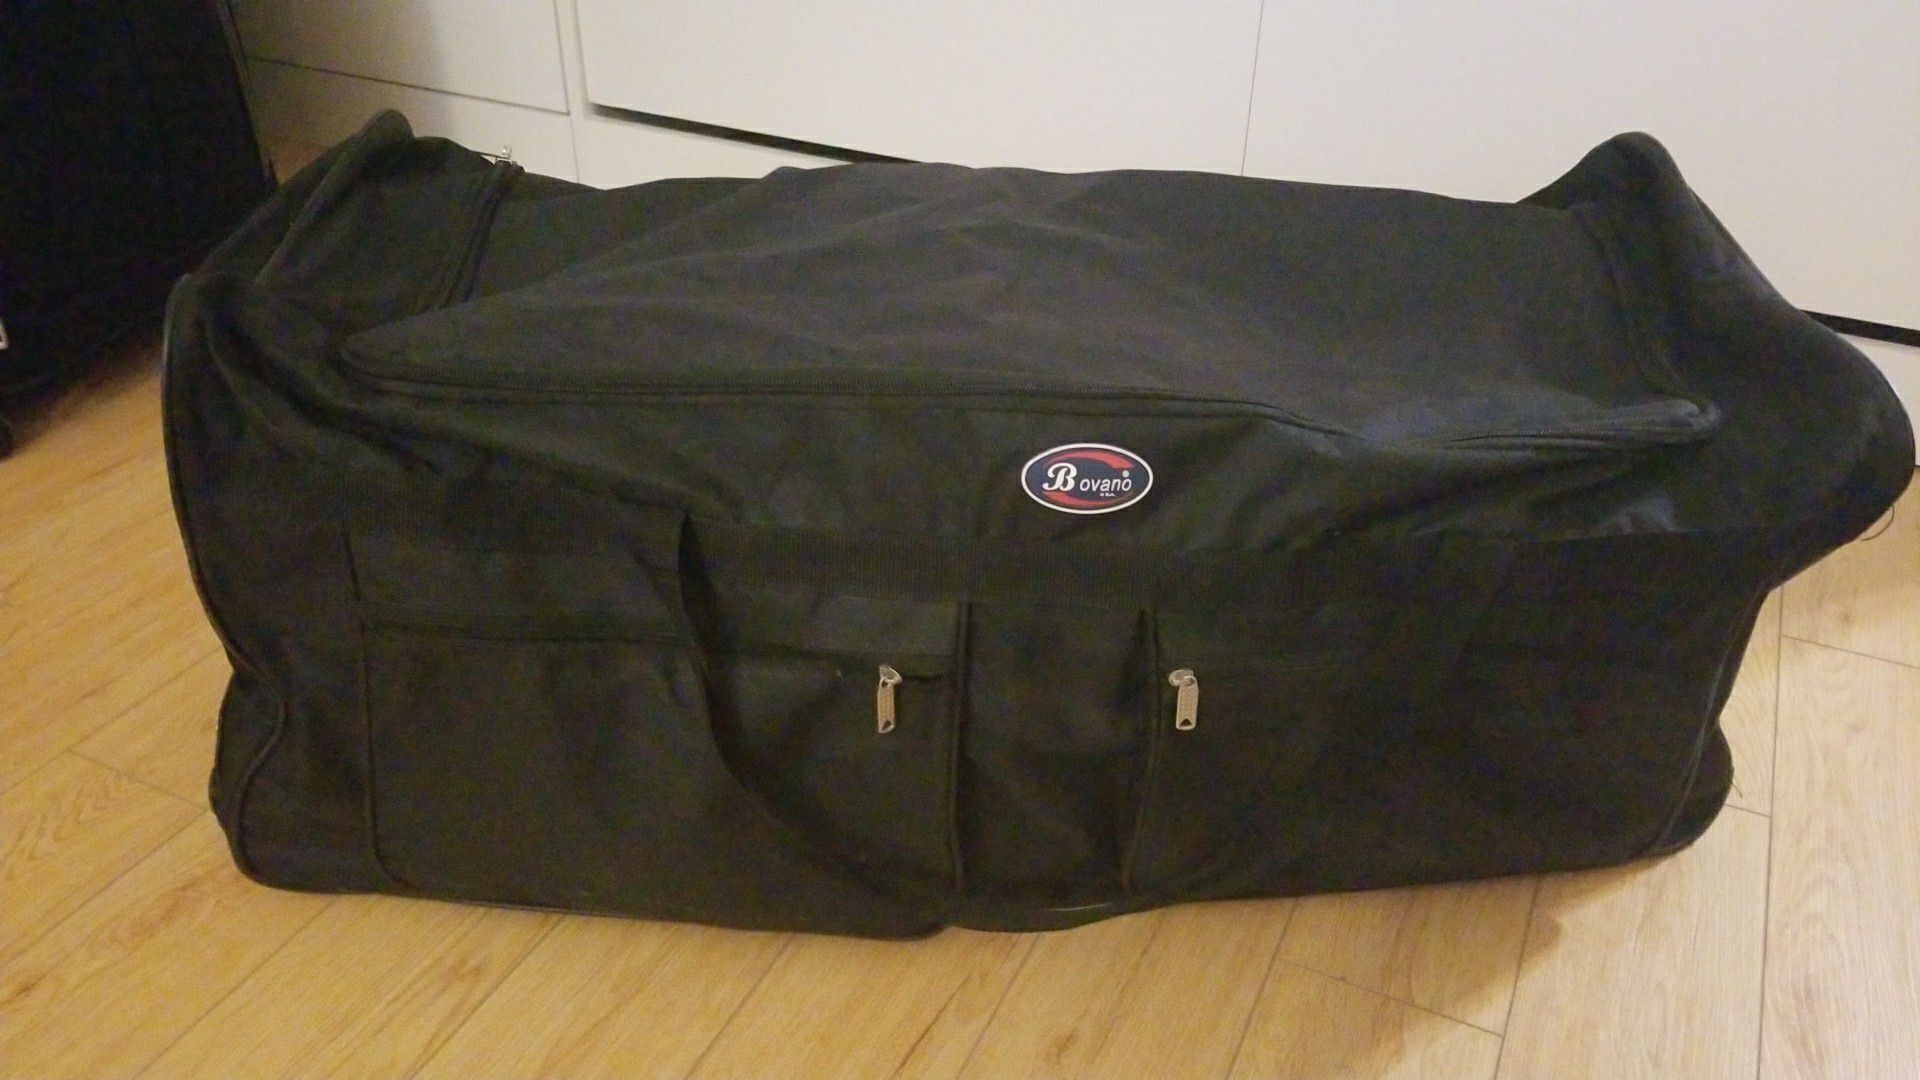 New extra large duffle bag with wheels